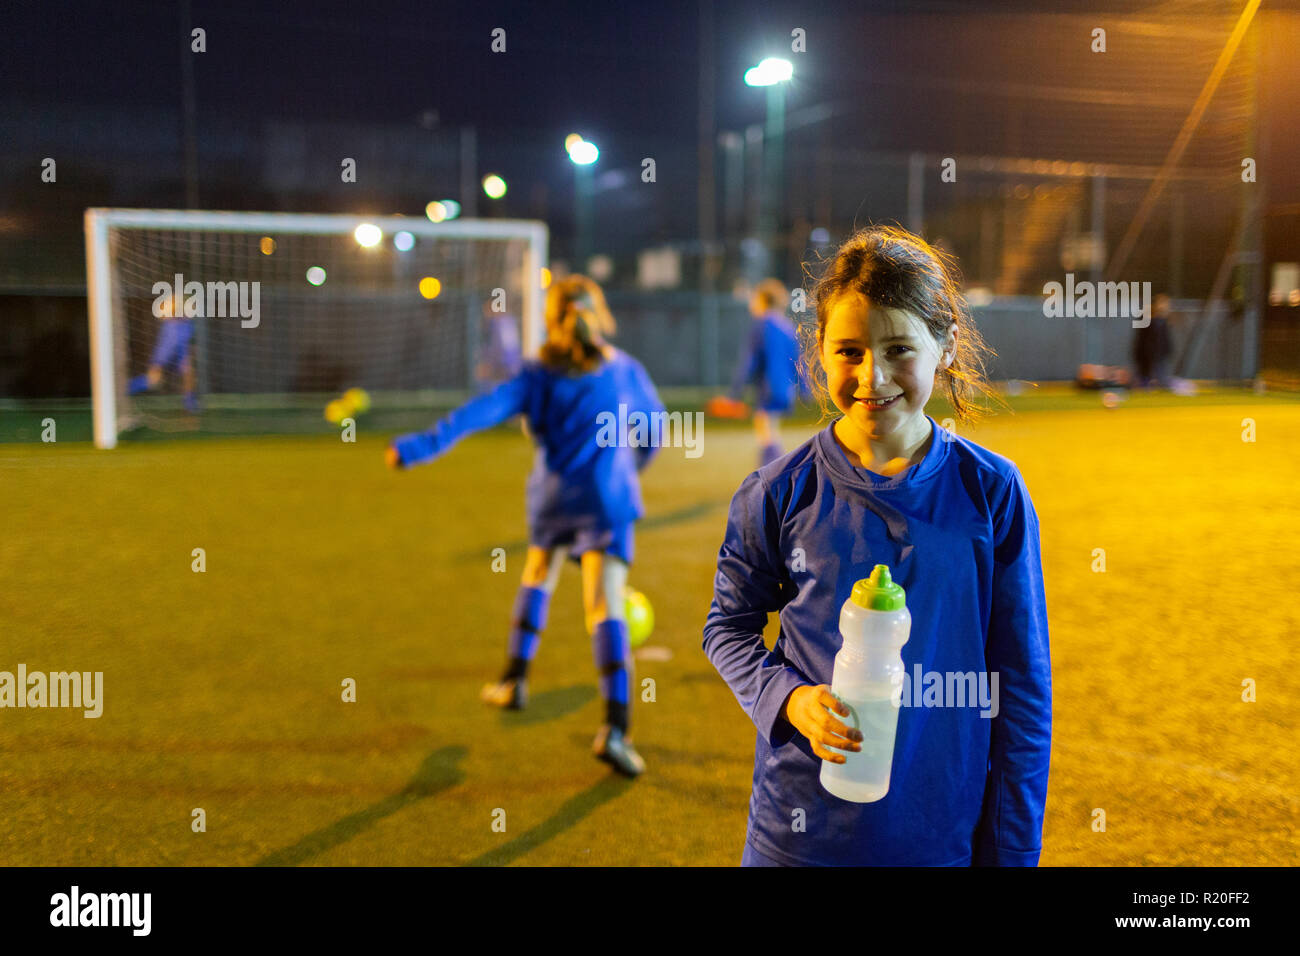 Portrait smiling girl soccer player drinking water on field at night Stock Photo